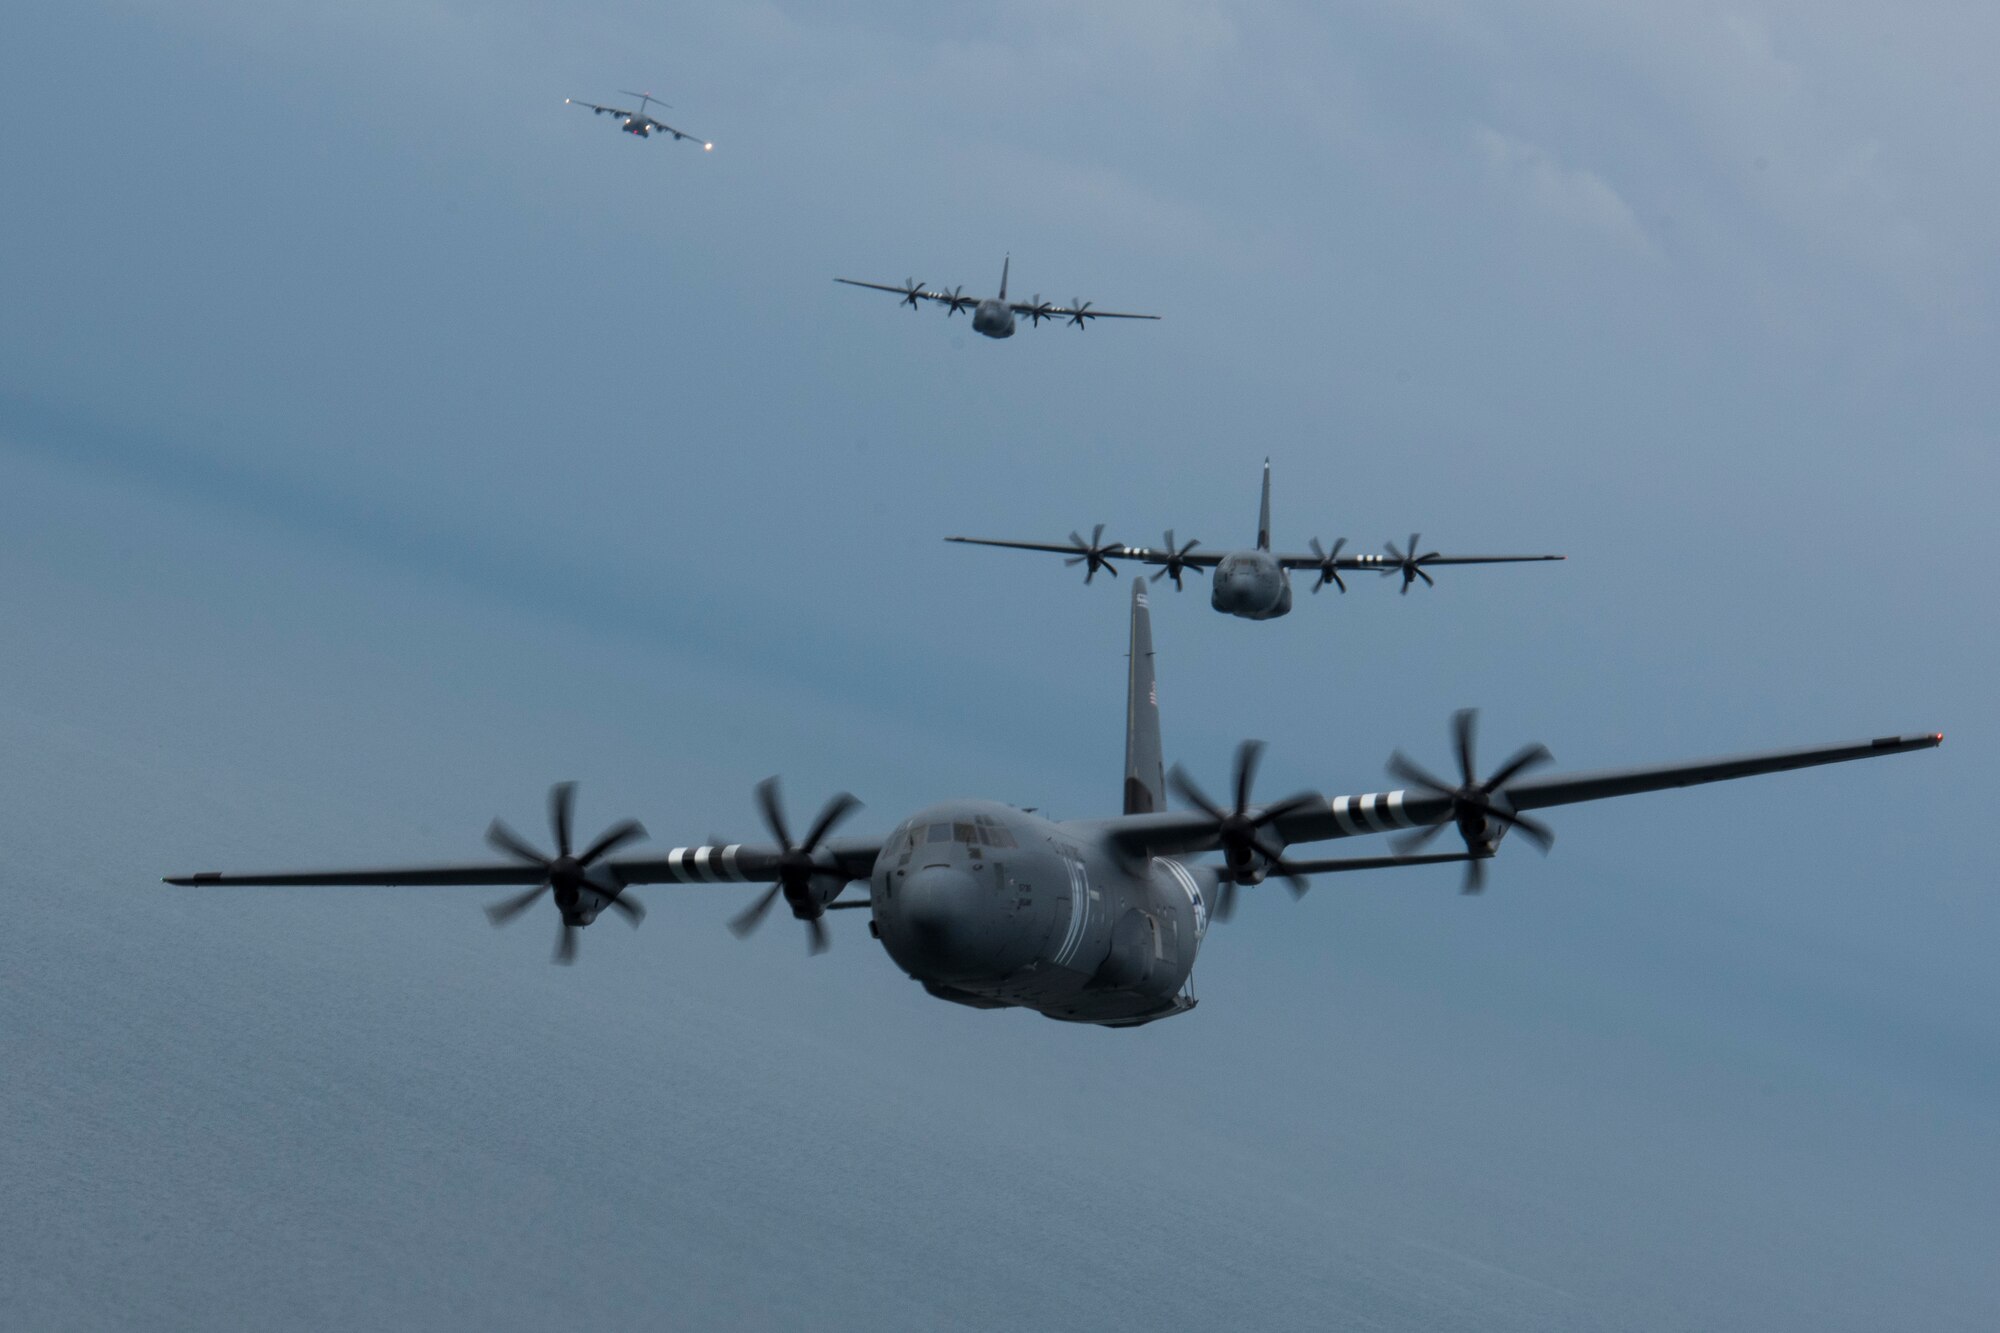 Three C-130J Super Hercules, belonging to the 37th Airlift Squadron on Ramstein Air Base, fly in a four-ship formation with a C-17 Globemaster III trailing a mile behind over the Atlantic Ocean near Normandy, France, June 5, 2019. The 37th AS is a legacy squadron to the 37th Troop Carrier Squadron, who on D-Day, June 6, 1944, accurately dropped hundreds of paratroopers onto the intended drop zone. The objective: to seize the city of Sainte-Mère-Église. The precision and accuracy carried out by the 37th TCS allowed the paratroopers to quickly take the city. Later, it would be discovered Sainte-Mère-Église was the first city liberated in France by Allied forces, in part because of the effort provided by the 37th TCS. (U.S. Air Force photo by Senior Airman Kristof J. Rixmann)